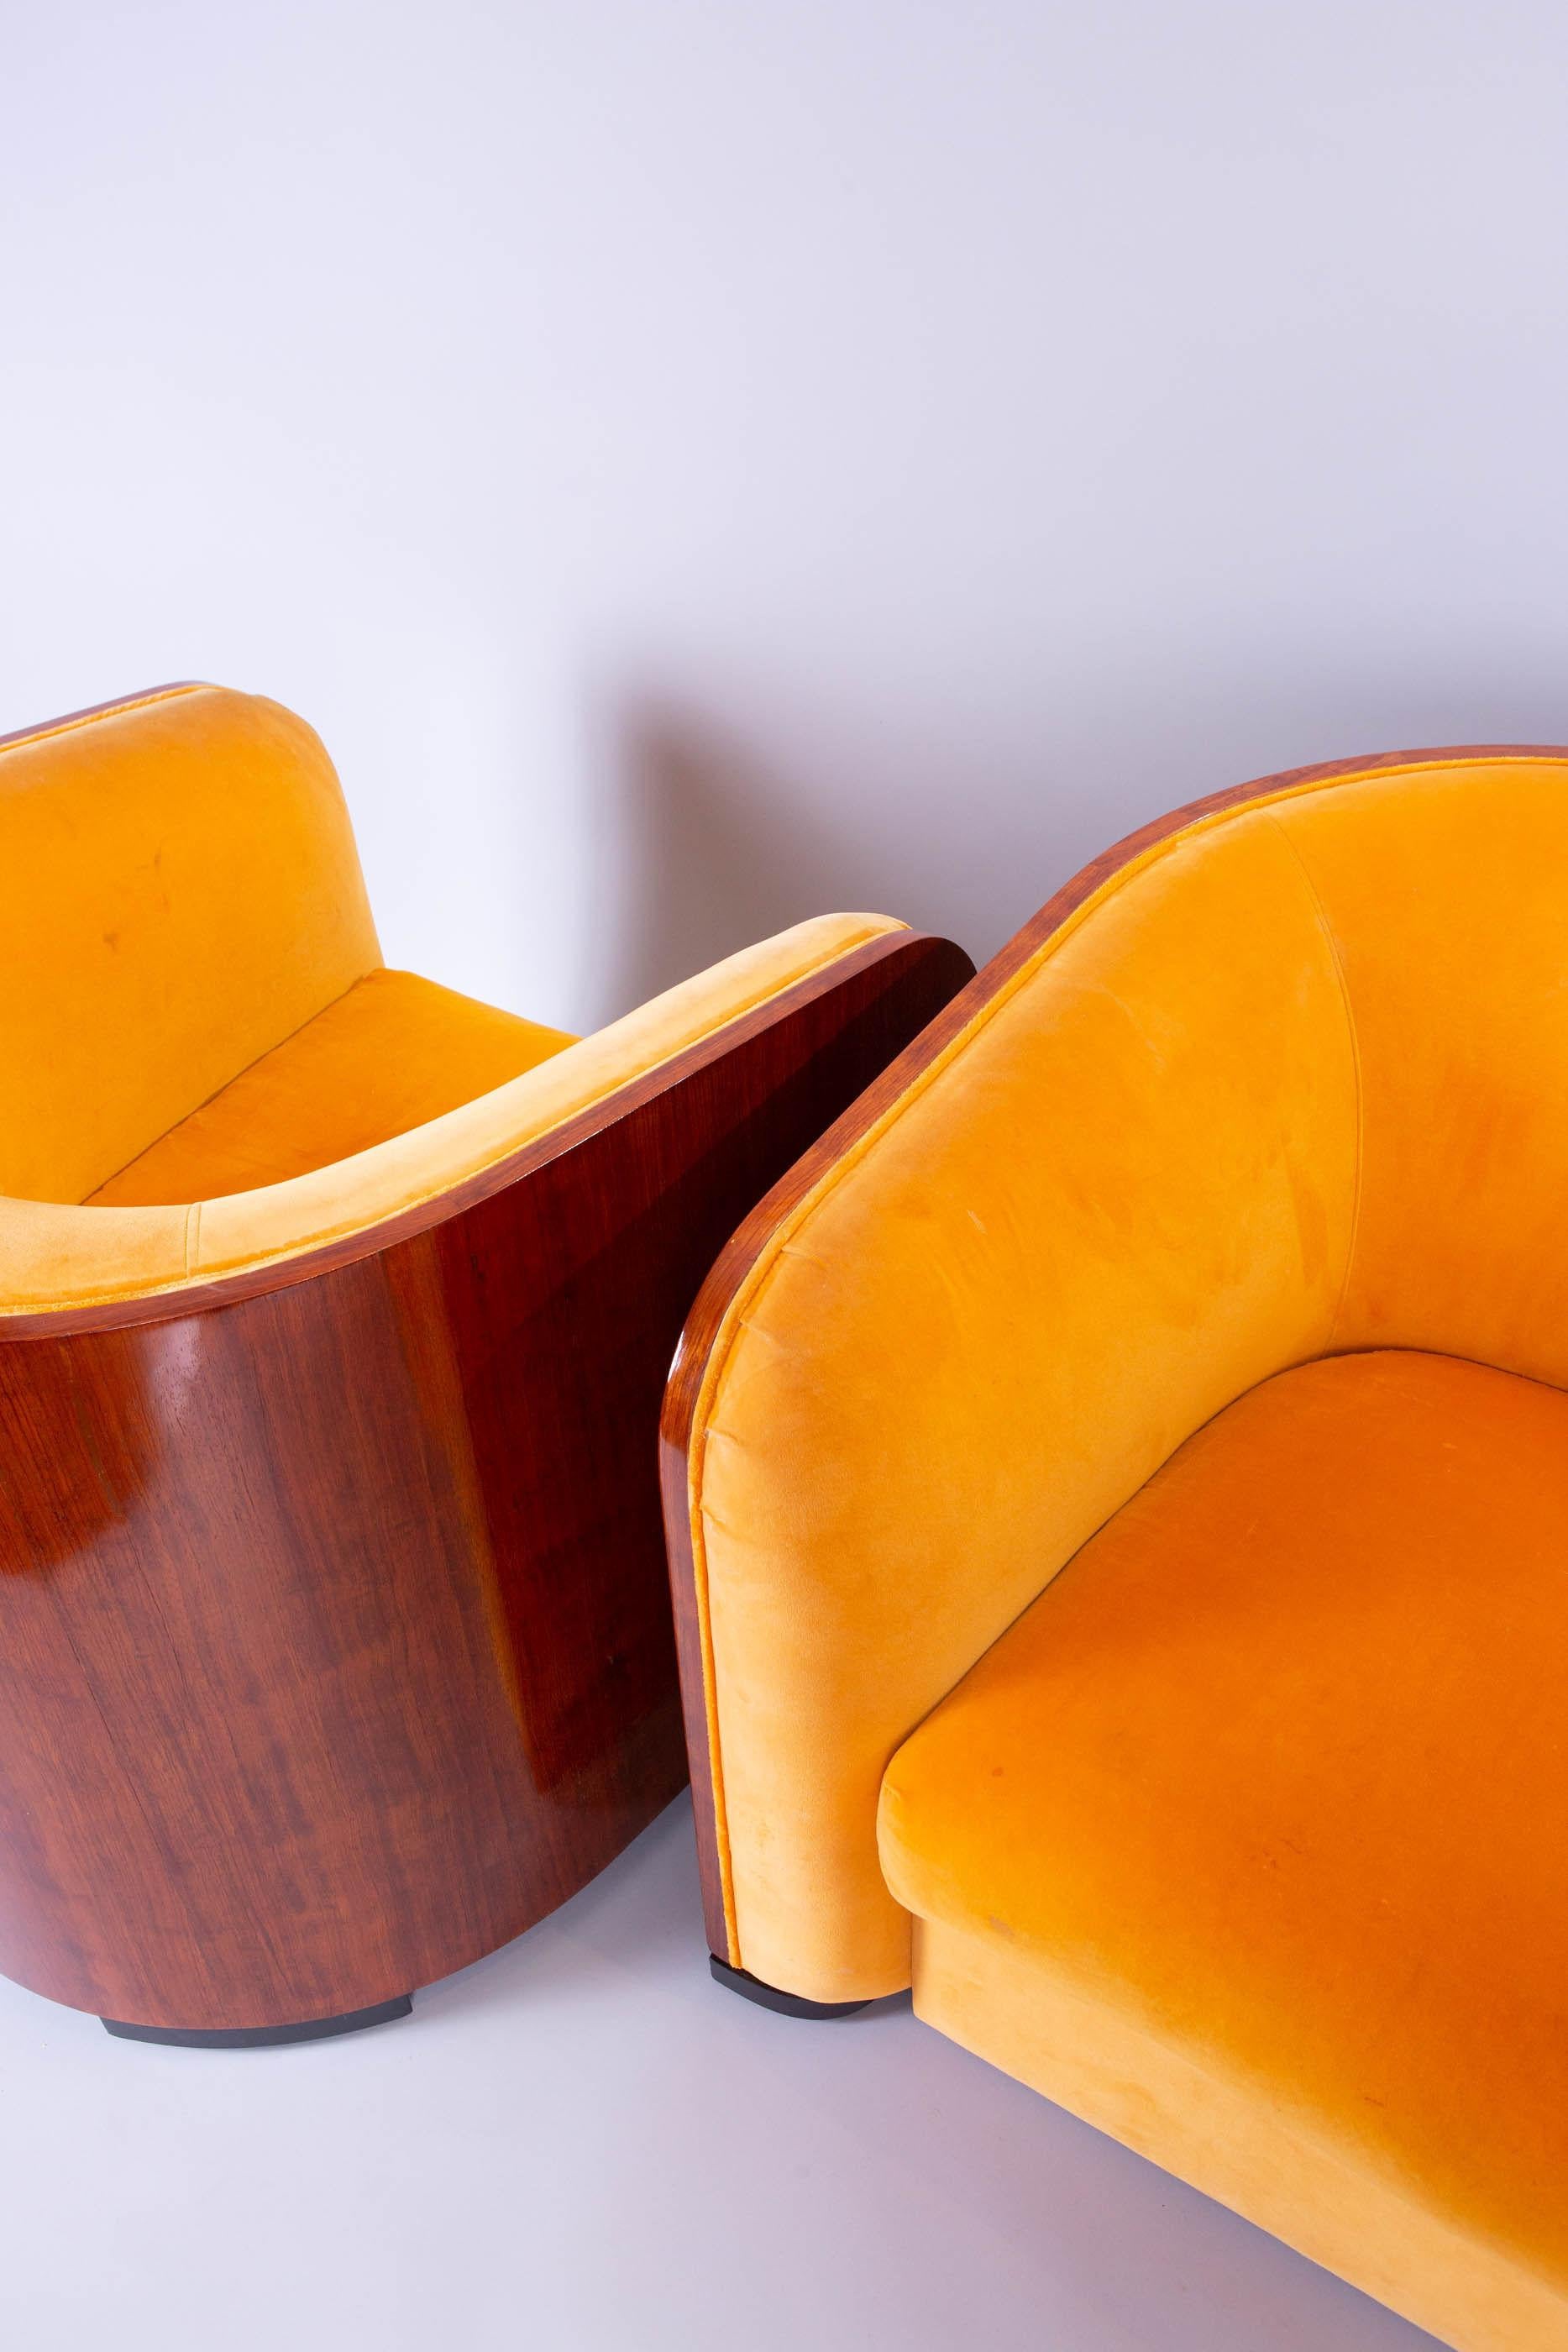 Upholstered in orange velvet, signs of normal wear on the velvet. Mahogany has been recently polished and is in excellent condition.